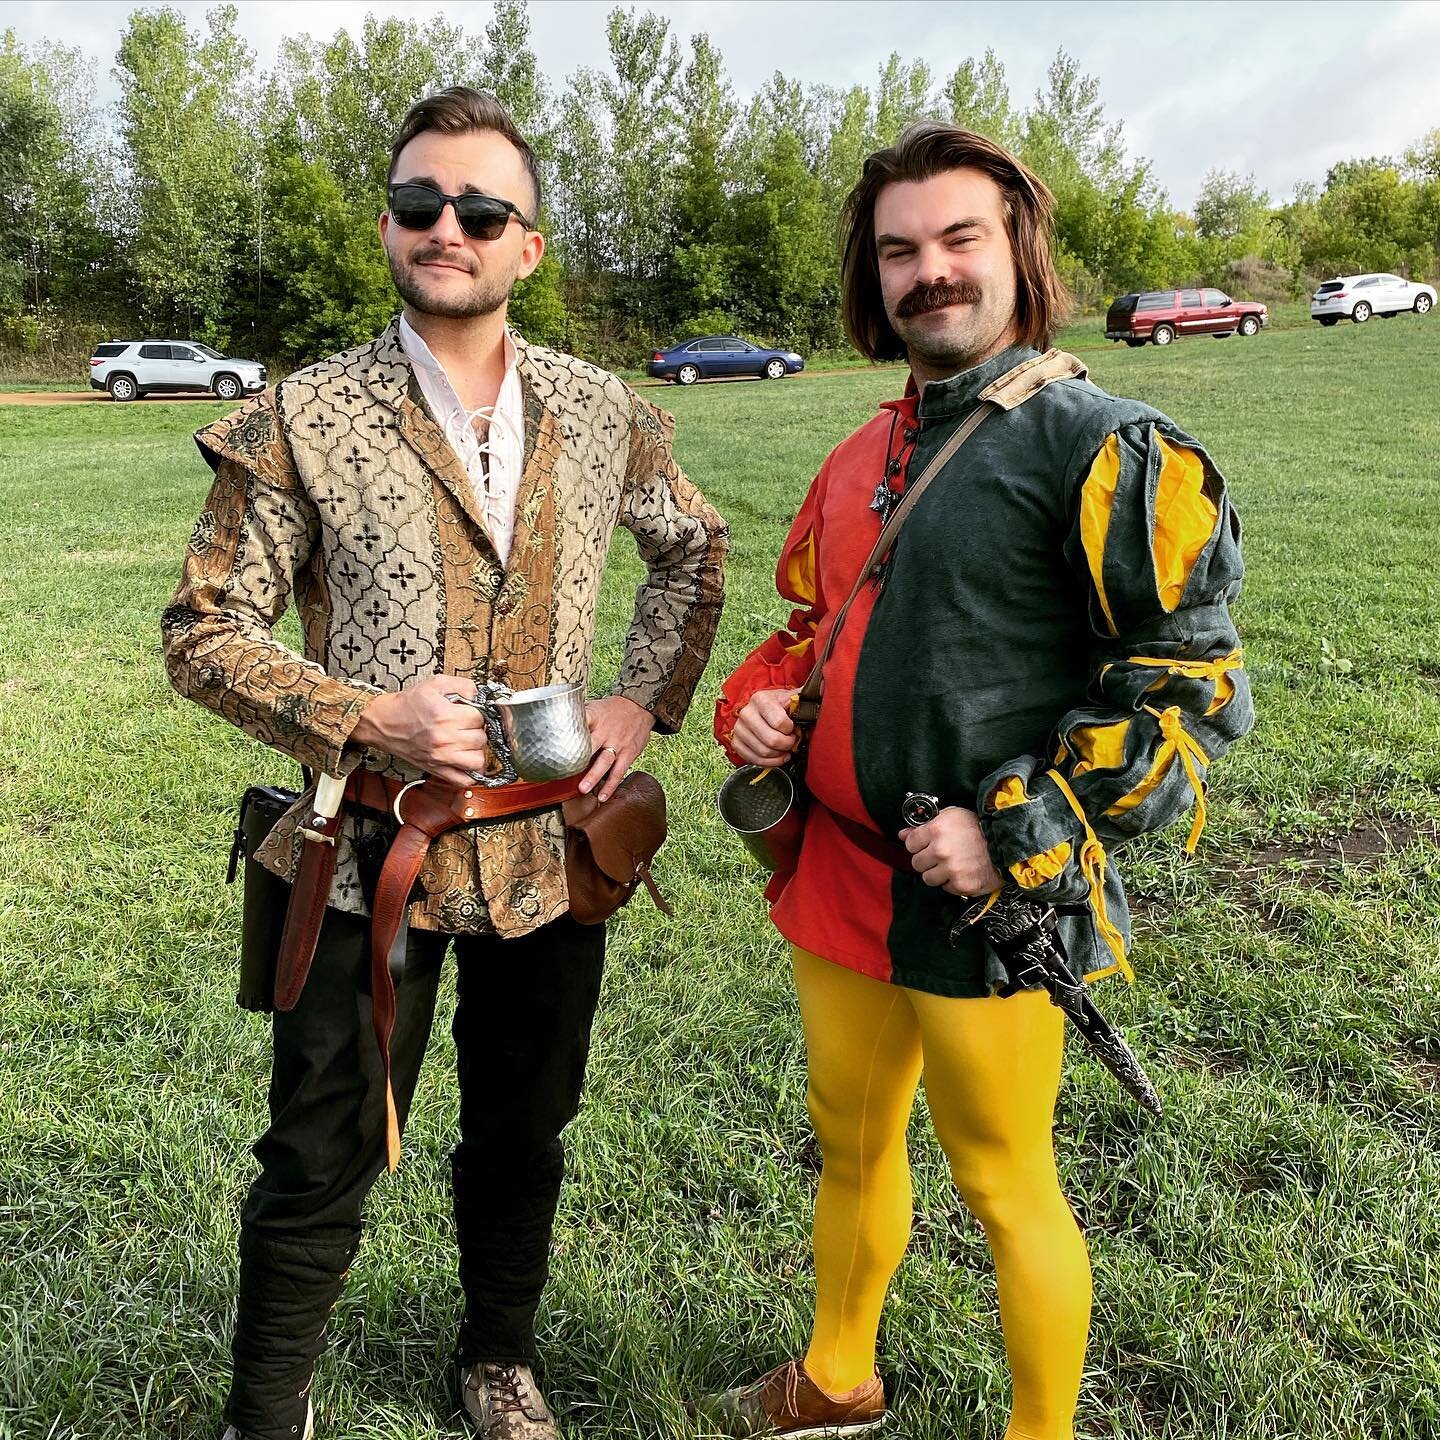 These two are heading to the @mnrenaissance TOMORROW to bounce around as playtrons, eat, drink, and be merry! If you see us, come say hi! Maybe we&rsquo;ll even sing you a song lol 😘
.
.
.
#mnrenaissancefestival #renaissancefaire #renaissancefestiva